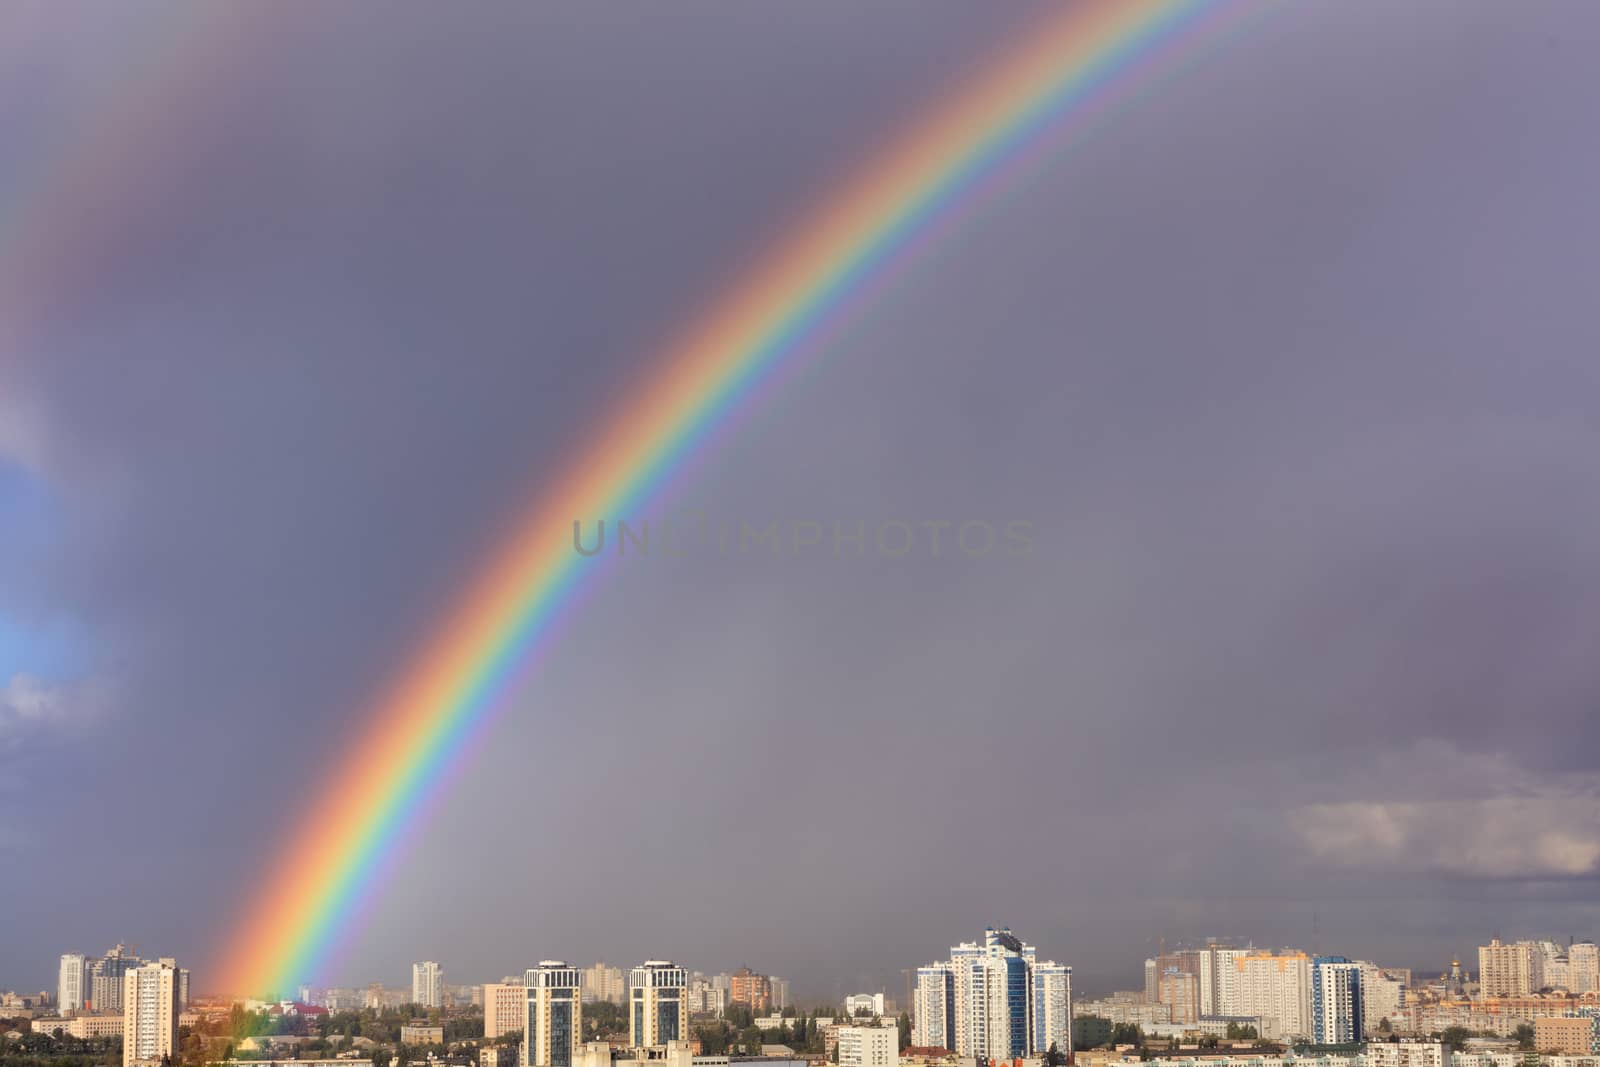 A large bright rainbow in the gray sky above the city after the last thunderstorm. by Sergii